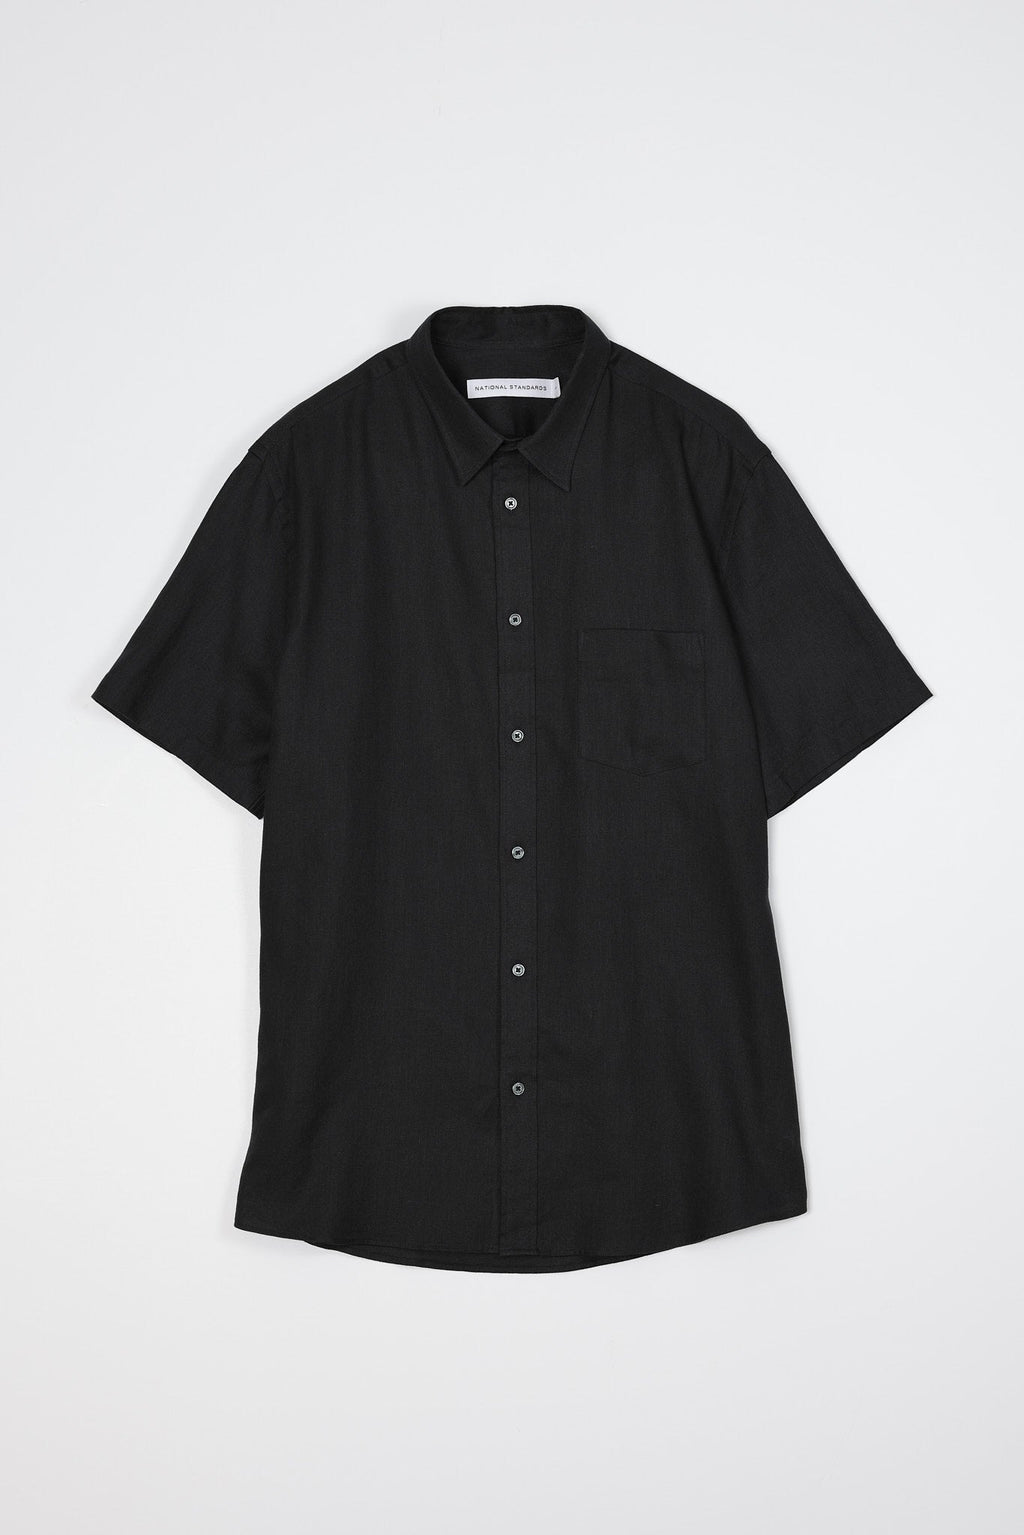 Japanese Dyed Twill in Black 01